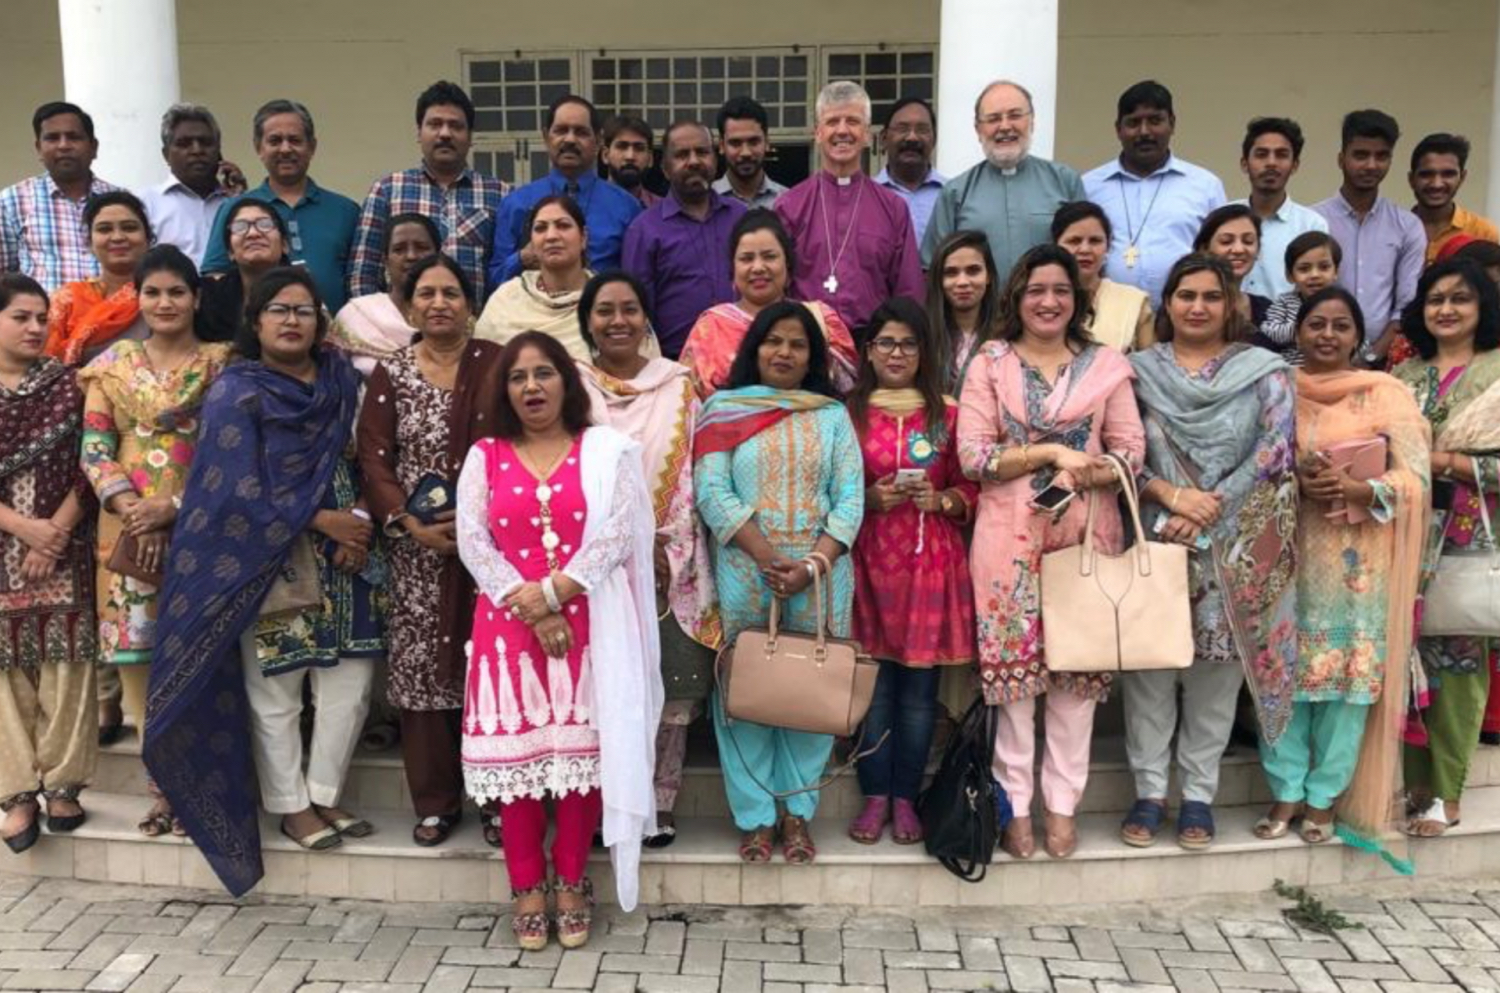 The Bishop of Guildford standing with a Church community in Pakistan